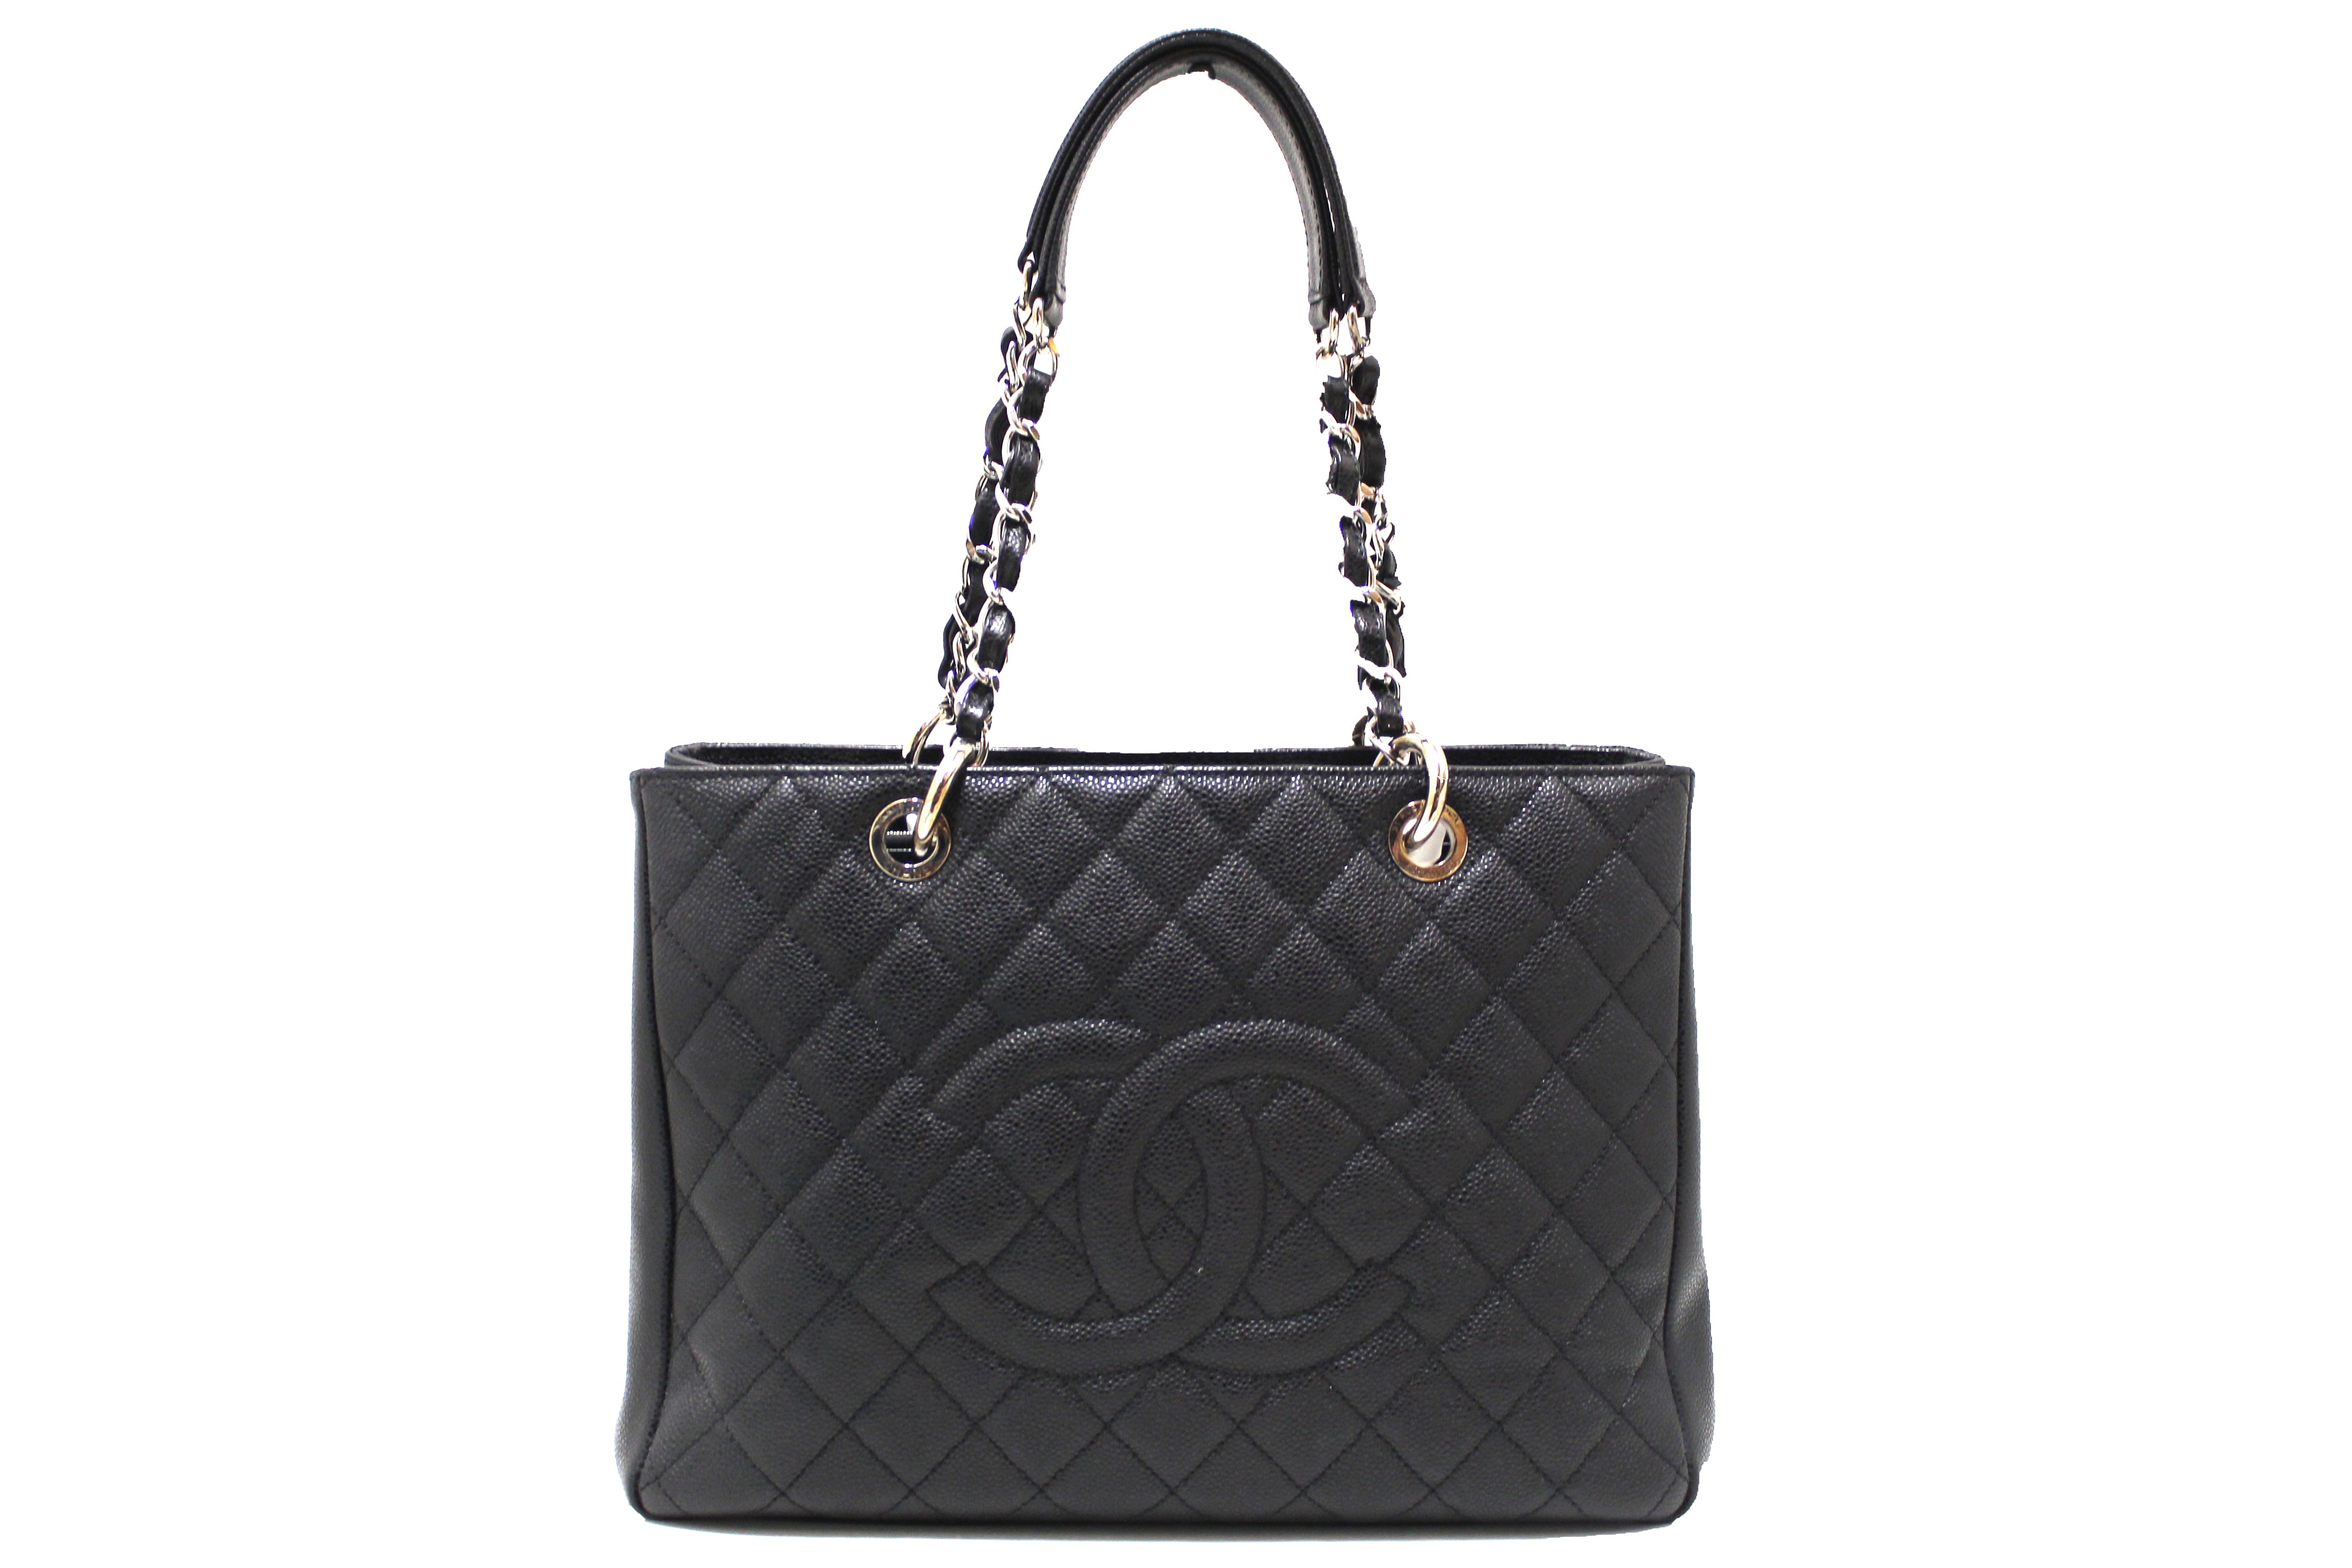 Authentic Chanel Black Quilted Caviar Leather Grand Shopper Tote Shoulder Bag